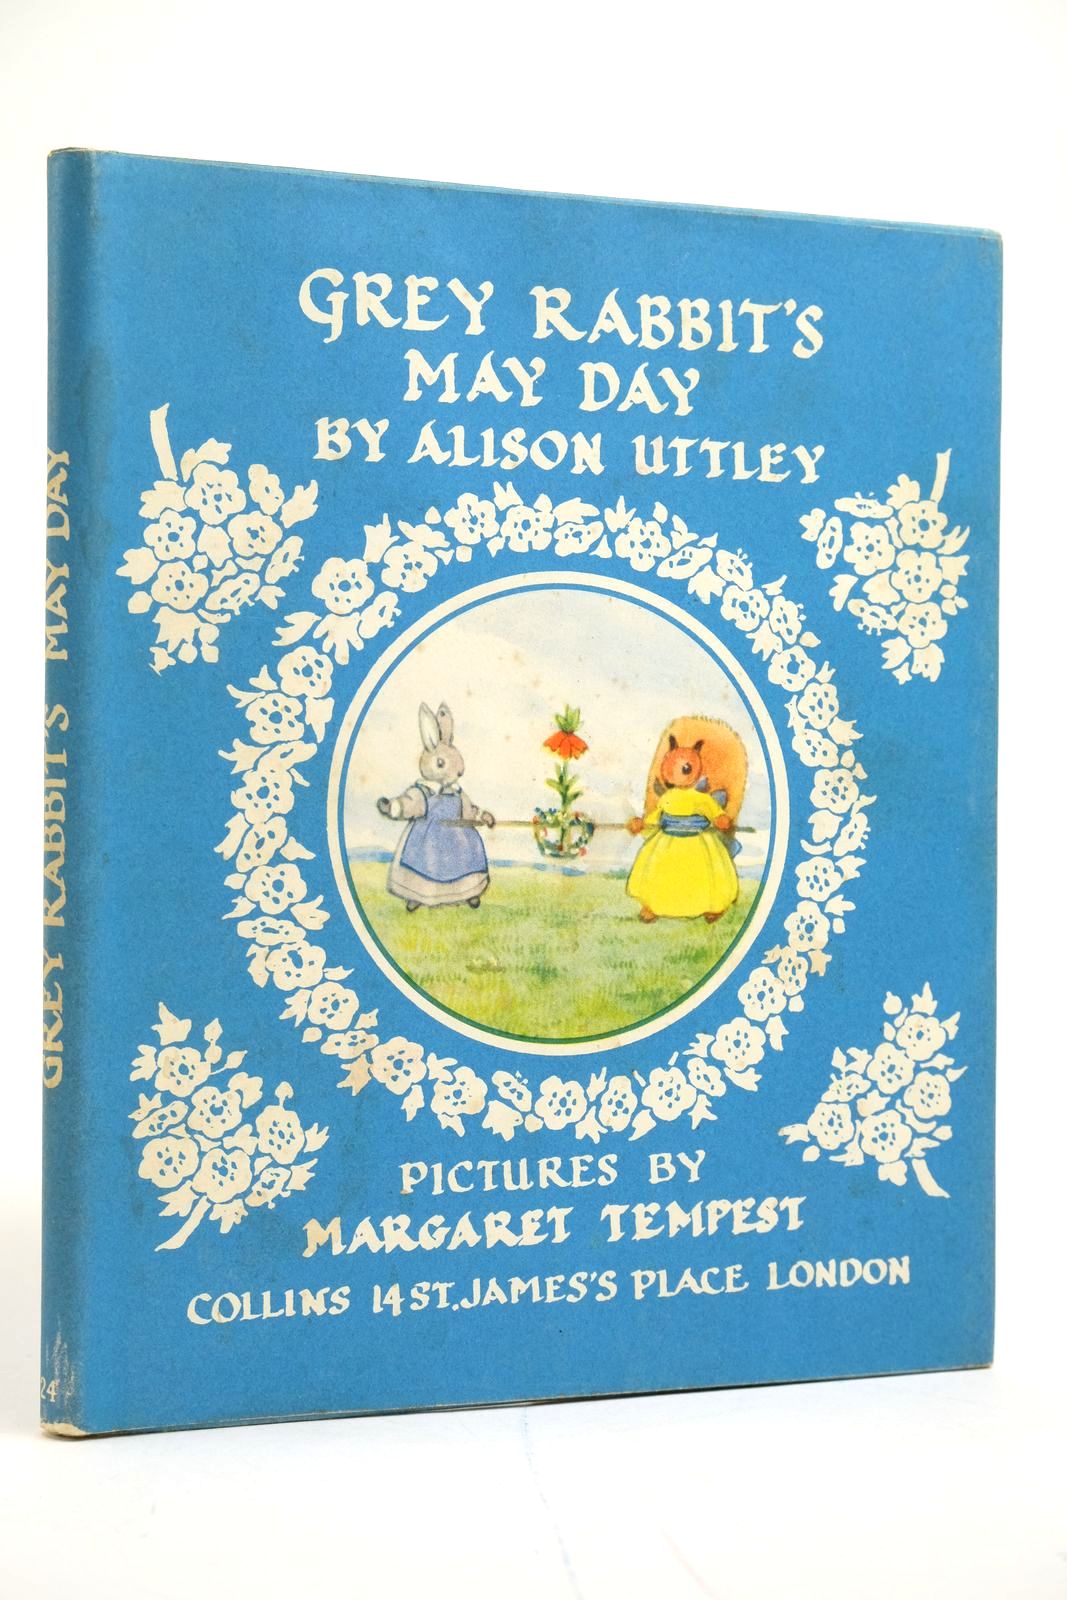 Photo of GREY RABBIT'S MAY DAY written by Uttley, Alison illustrated by Tempest, Margaret published by Collins (STOCK CODE: 2135086)  for sale by Stella & Rose's Books